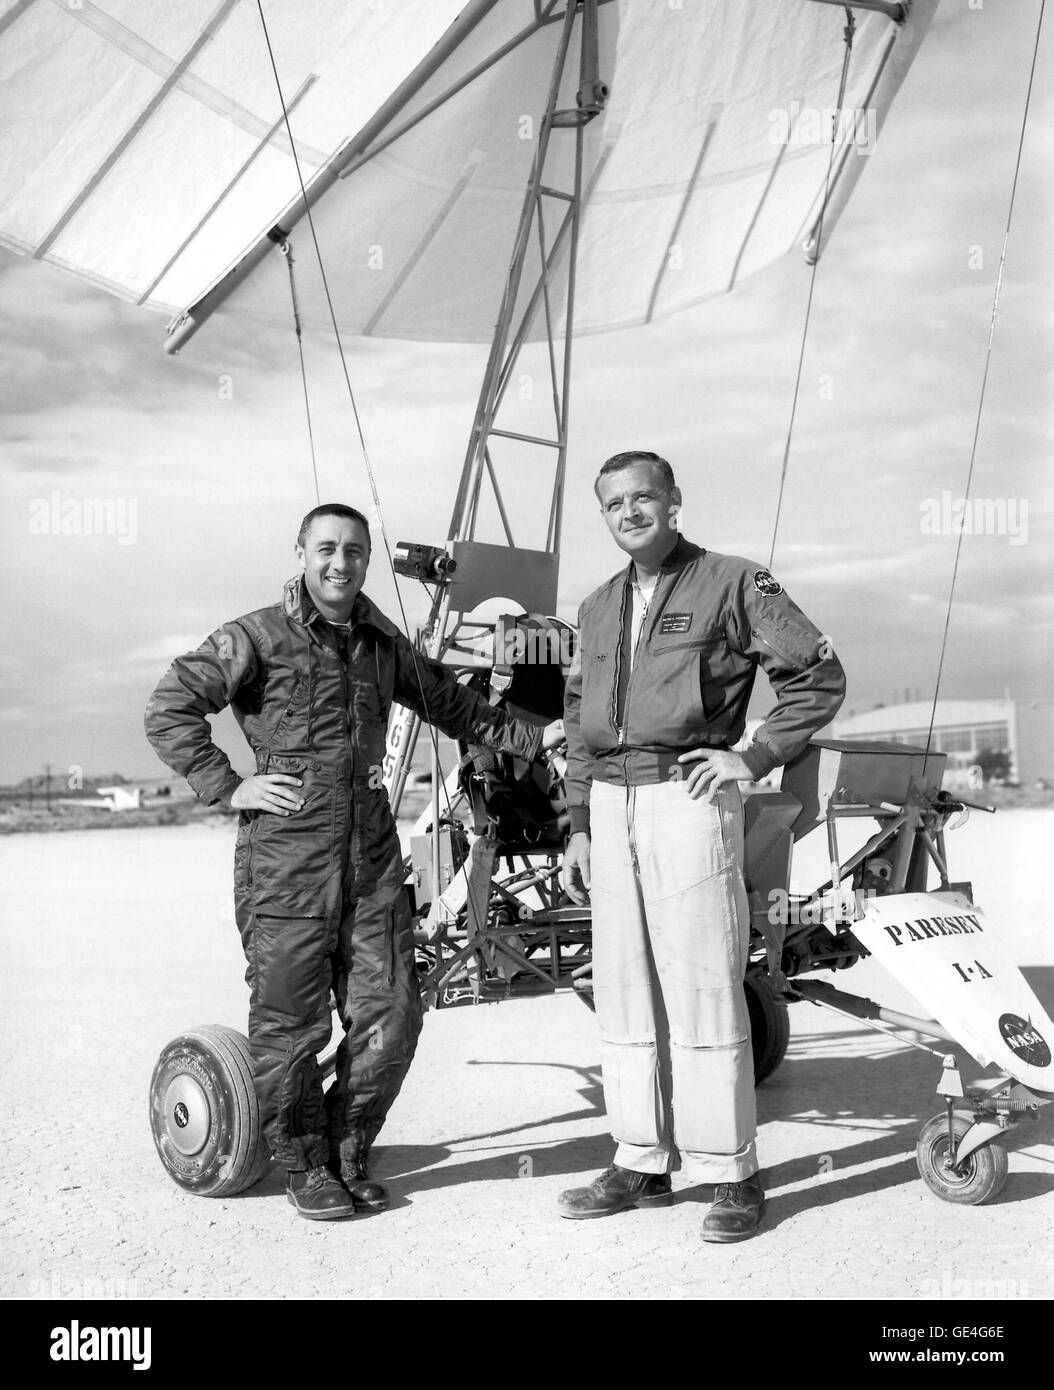 The Paresev 1-A standing at Rogers Dry Lakebed at the NASA Flight Research Center (now Armstrong Flight Research Center), Edwards, California. Mercury Astronaut Gus Grissom is at left and NASA test pilot Milton Thompson is at right. The Paresev evaluated a potential replacement for parachutes used on spacecraft. The Paresev was steerable and was evaluated for use on the Gemini spacecraft. The idea was not workable, however.  Image # : E-8937 Date: October 17, 1962 Stock Photo